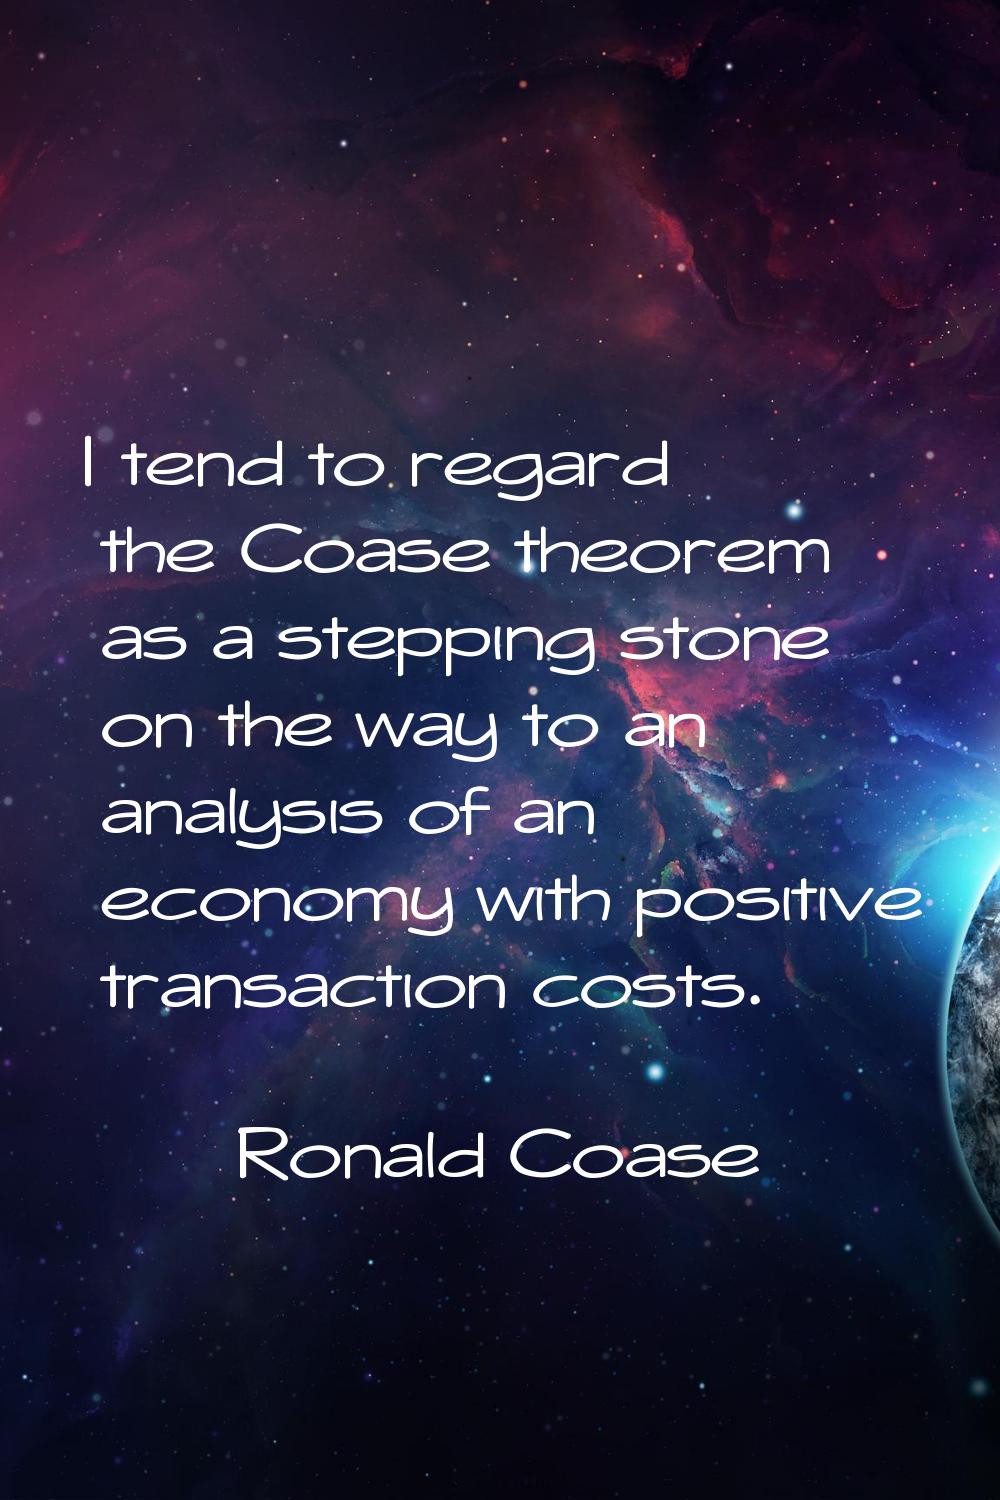 I tend to regard the Coase theorem as a stepping stone on the way to an analysis of an economy with